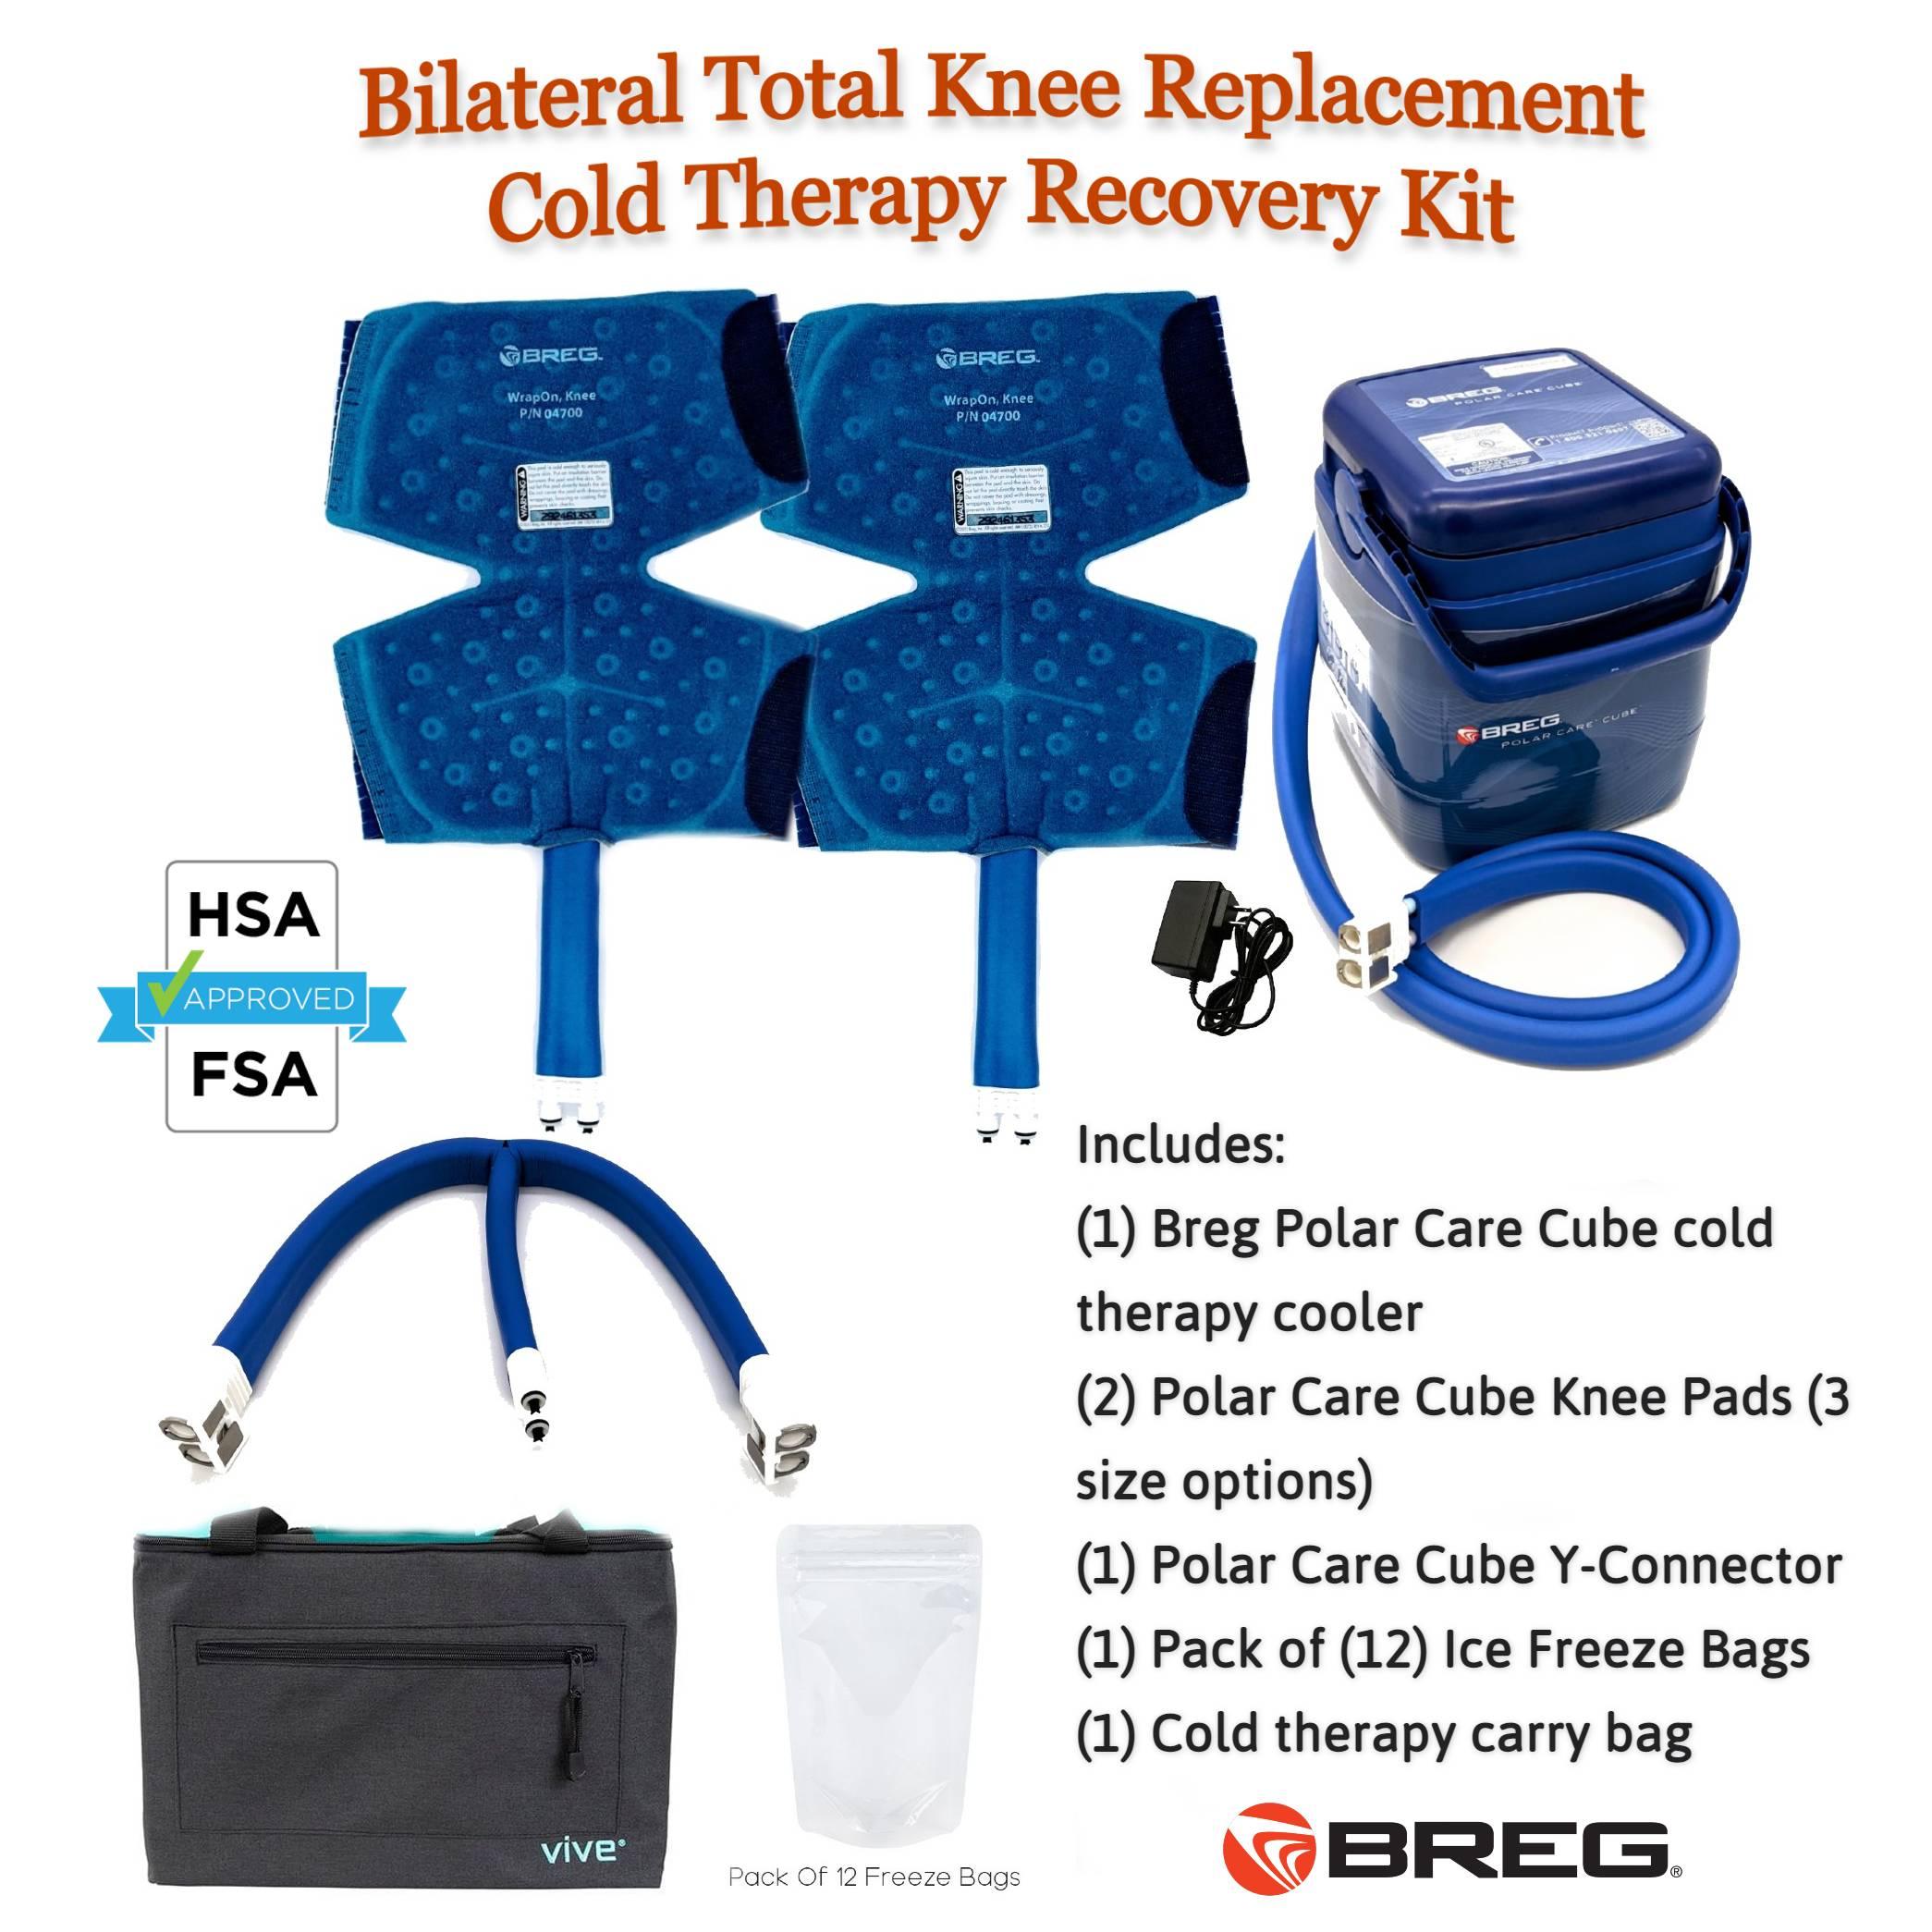 Bilateral Total Knee Replacement (BTKR) Cold Therapy Recovery Kit - BTKR-Combo-Kit-Med Bilateral Total Knee Replacement (BTKR) Cold Therapy Recovery Kit - undefined by Supply Physical Therapy Breg, DKR Recovery Kit, Kit